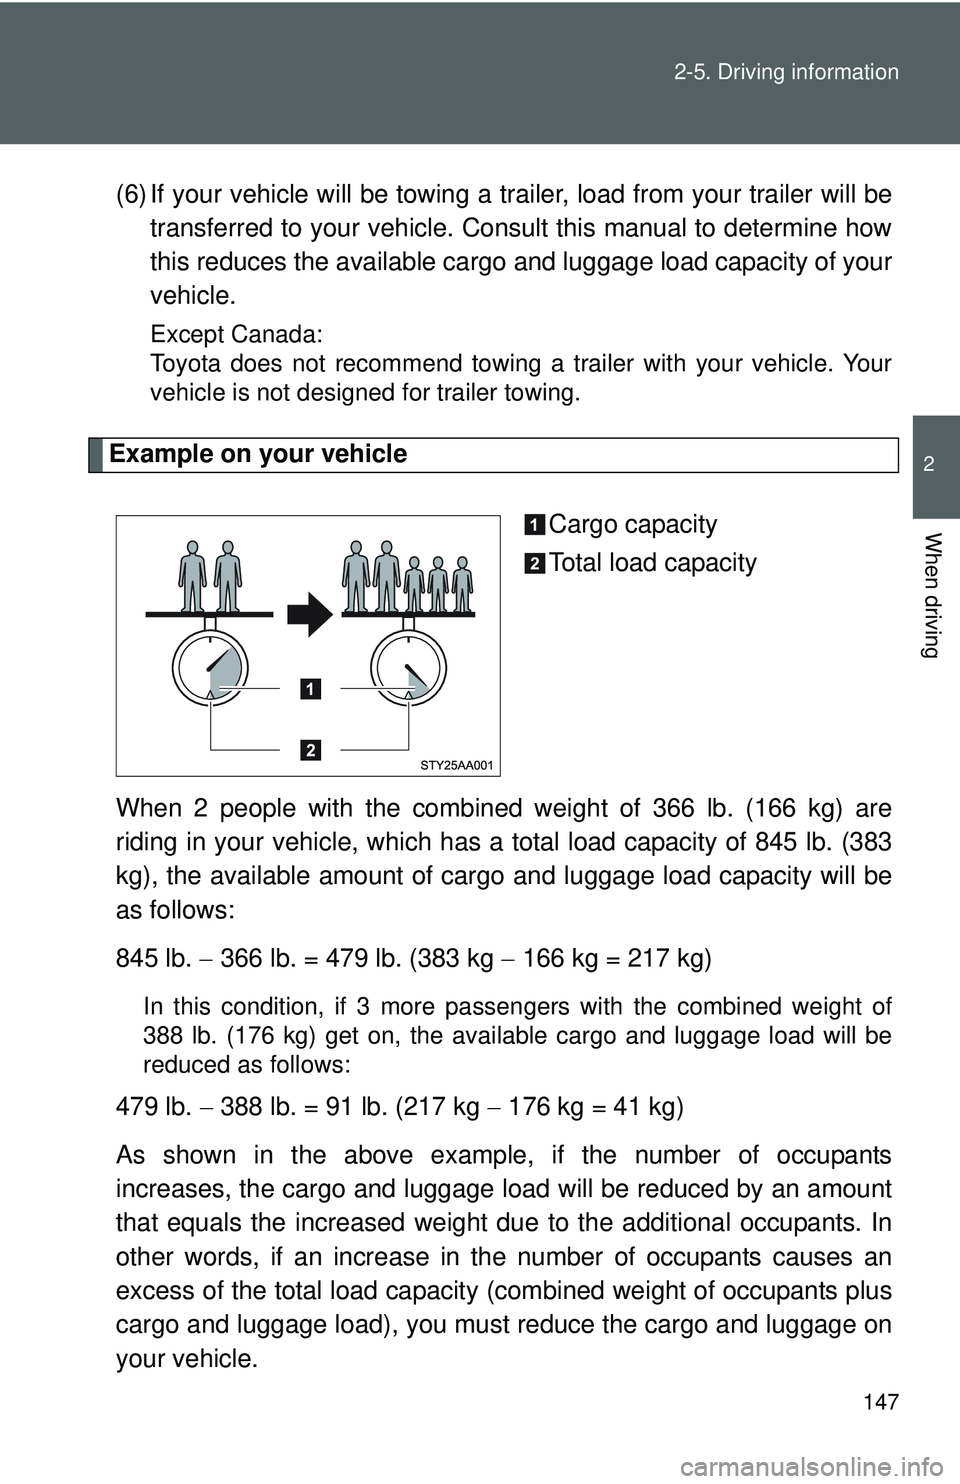 TOYOTA YARIS SEDAN 2011  Owners Manual 147
2-5. Driving information
2
When driving
(6) If your vehicle will be towing a tr
ailer, load from your trailer will be
transferred to your vehicle. Consult this manual to determine how
this reduces